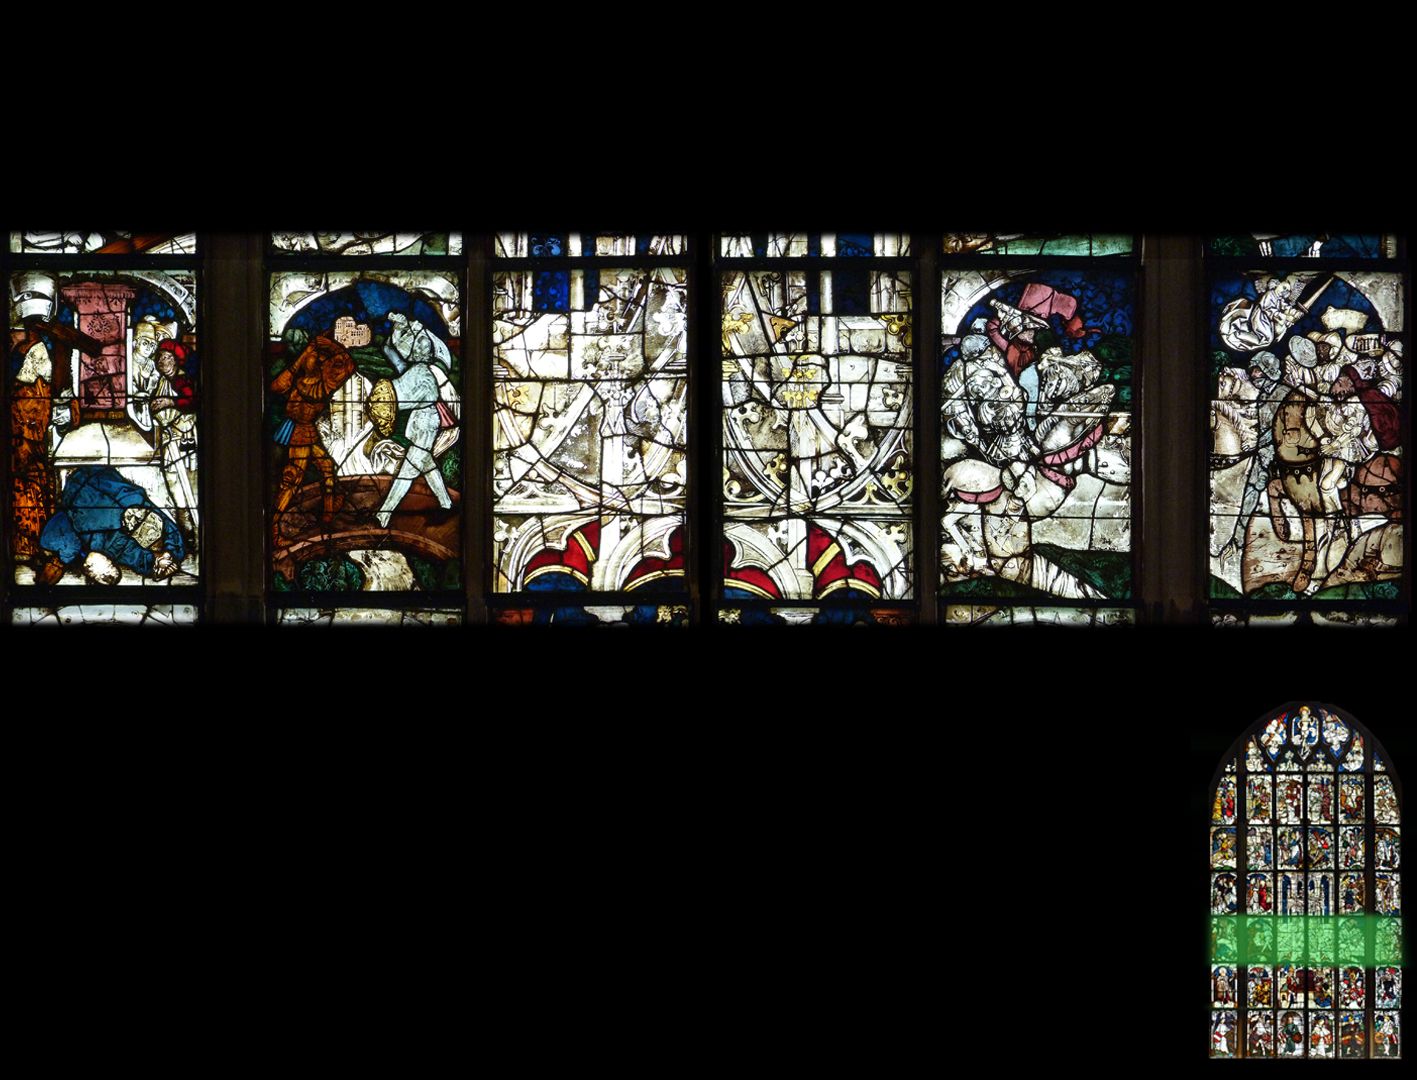 Imperial window 3rd line